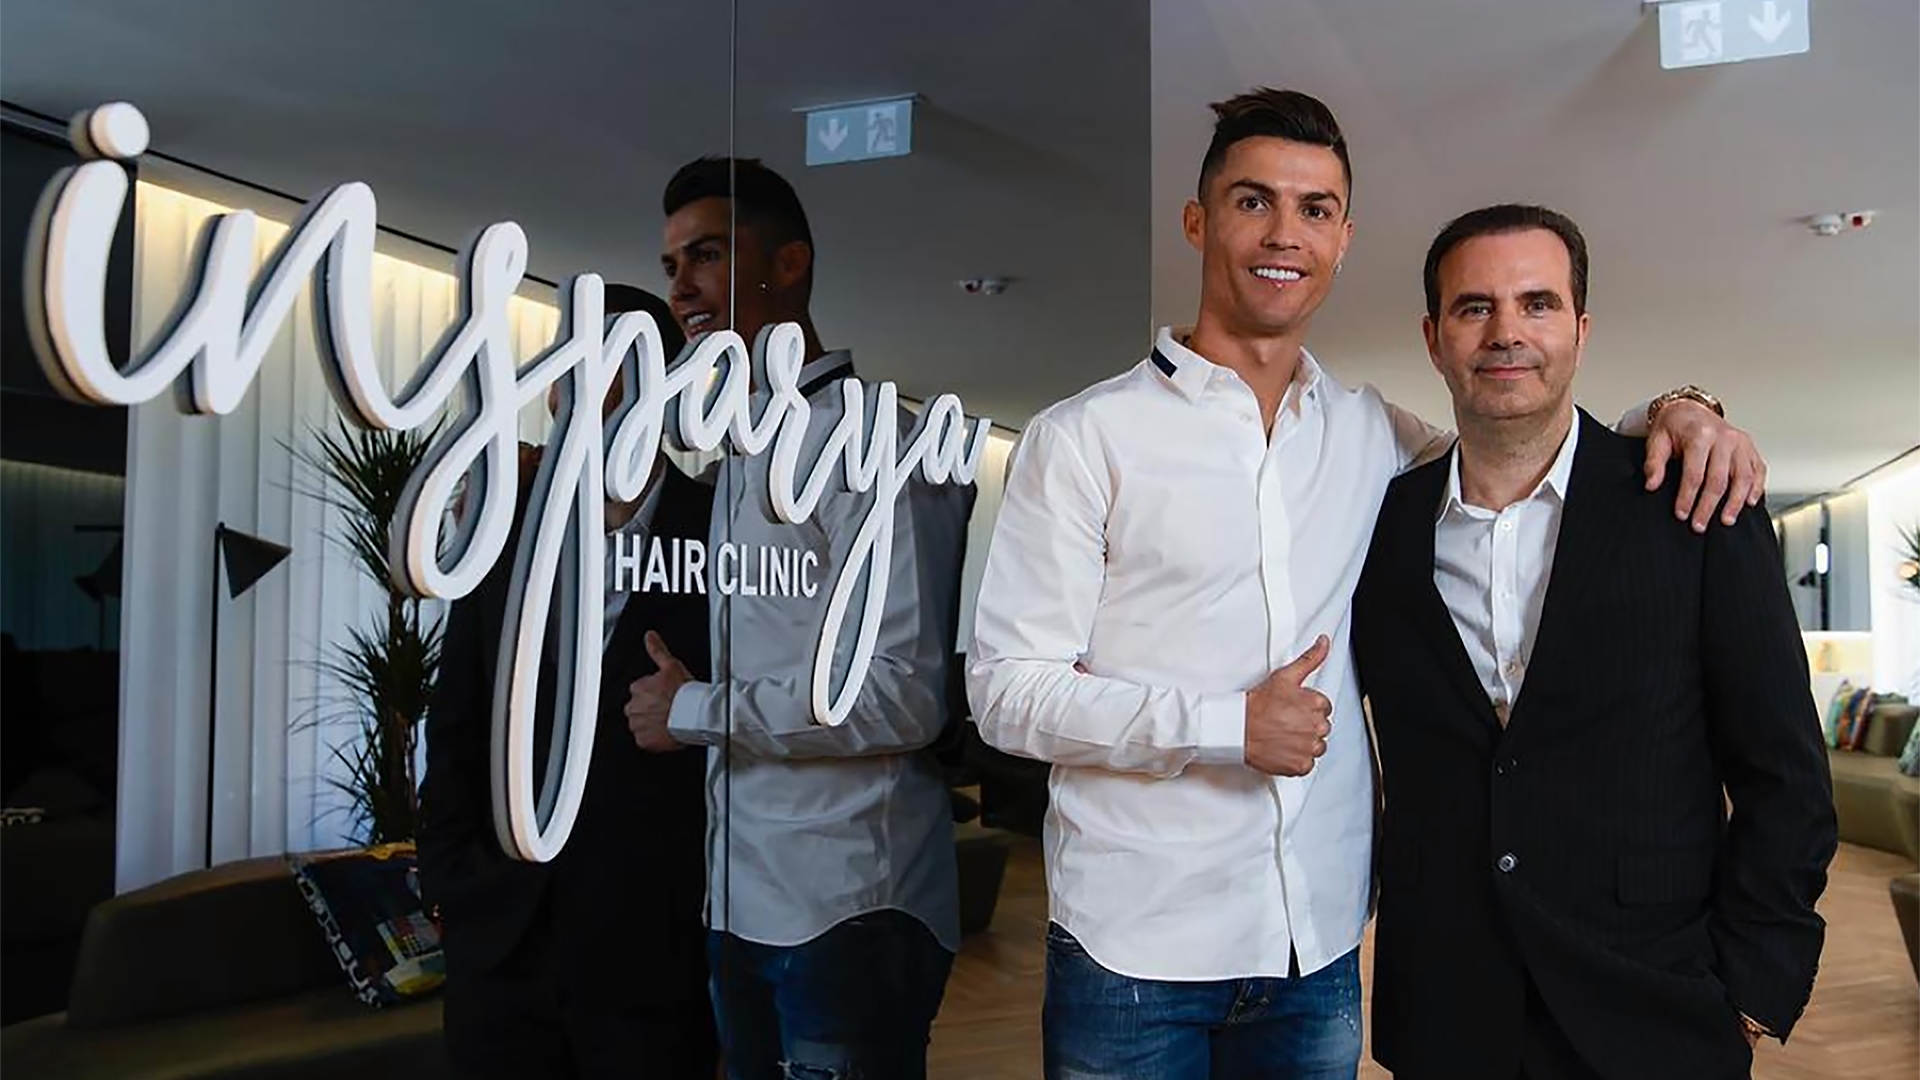 Cristiano Ronaldo hair transplant clinic: What is it, how much it'll cost &  full details 